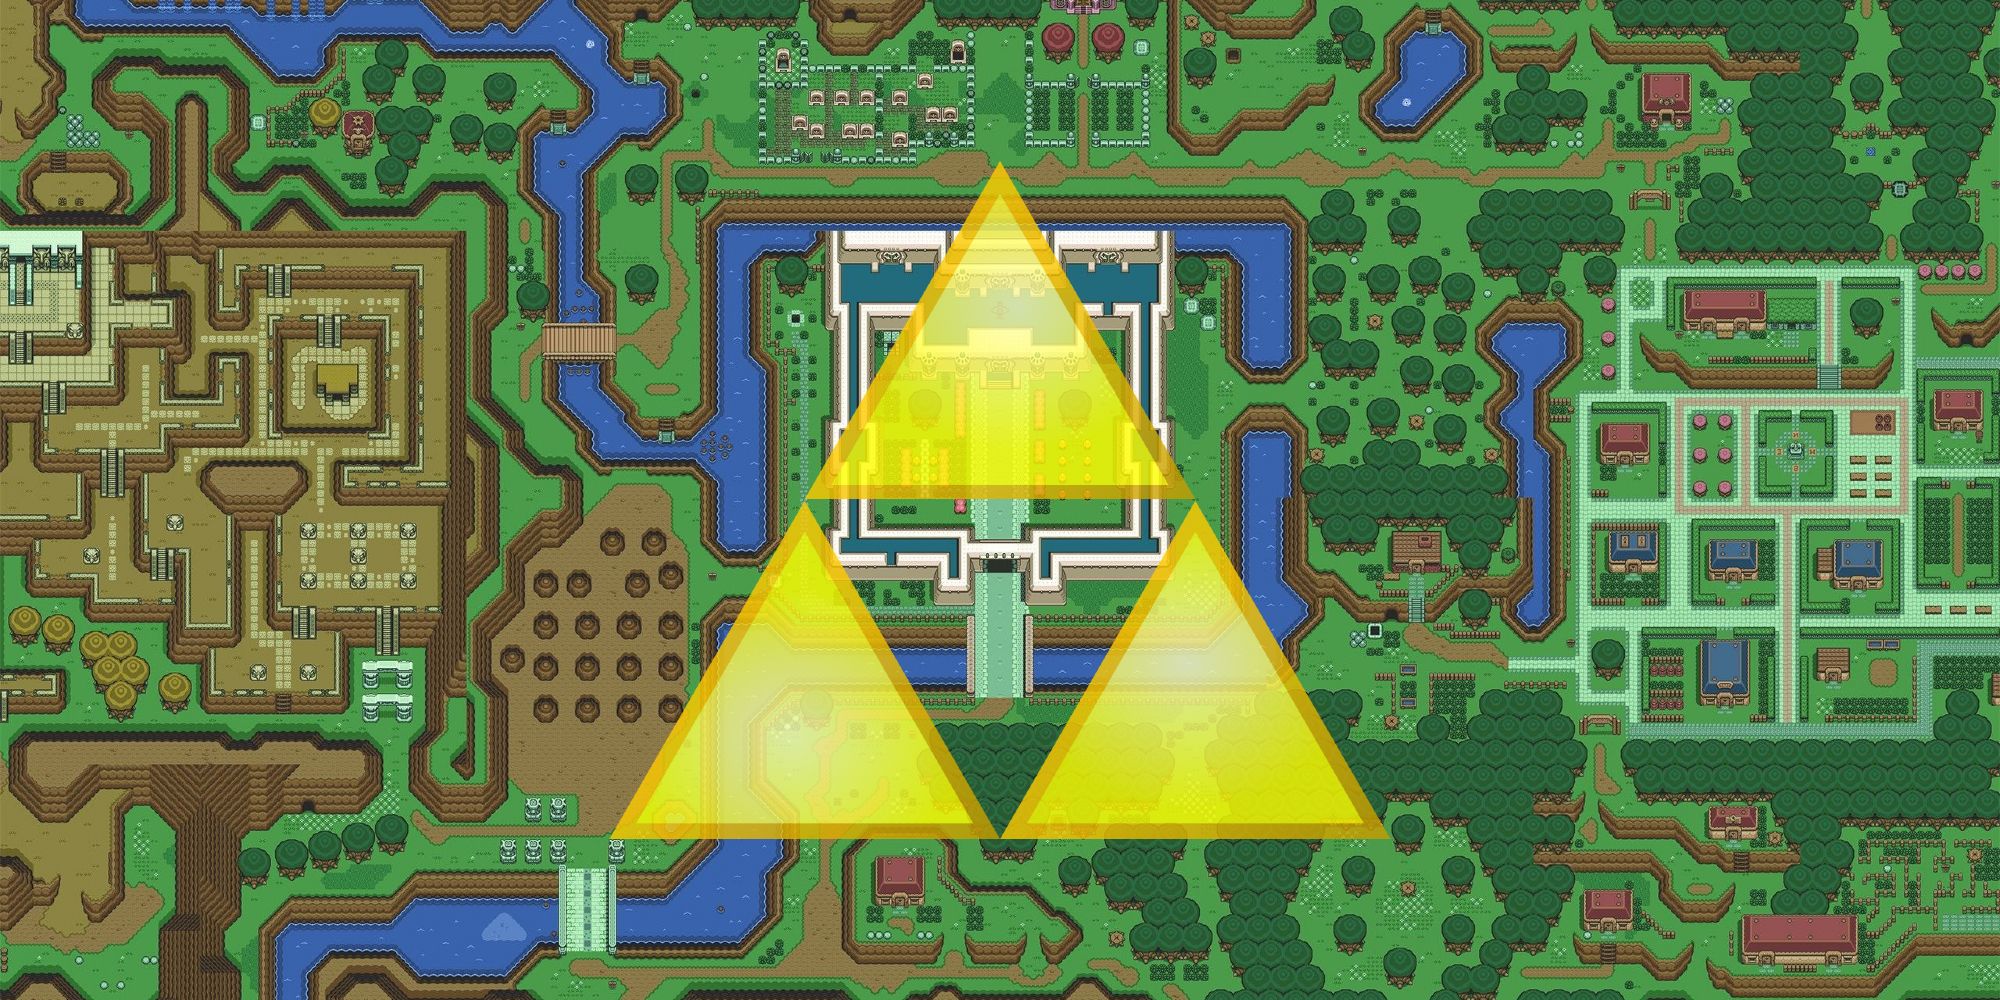 Zelda Dungeon - How many of you started with A Link to the Past